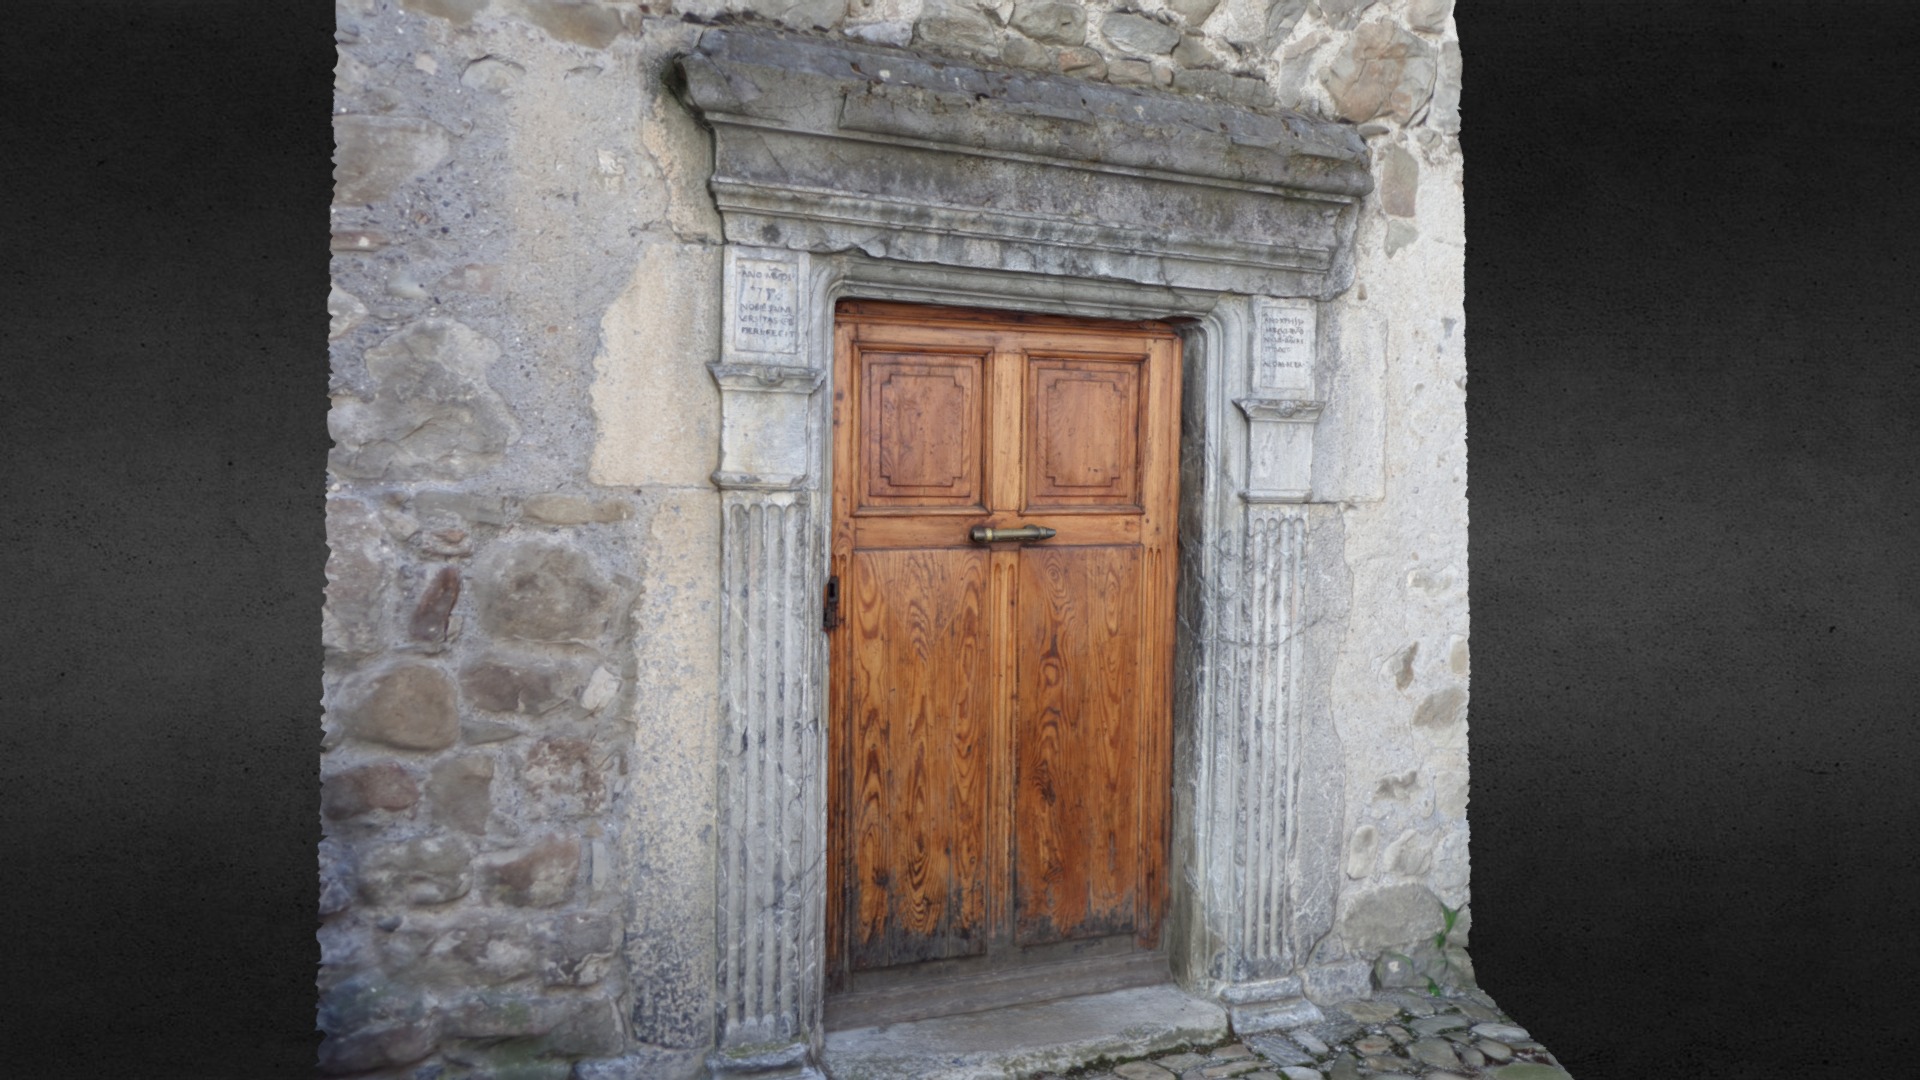 3D model Small Door at the back of the church - This is a 3D model of the Small Door at the back of the church. The 3D model is about a wooden door in a stone building.